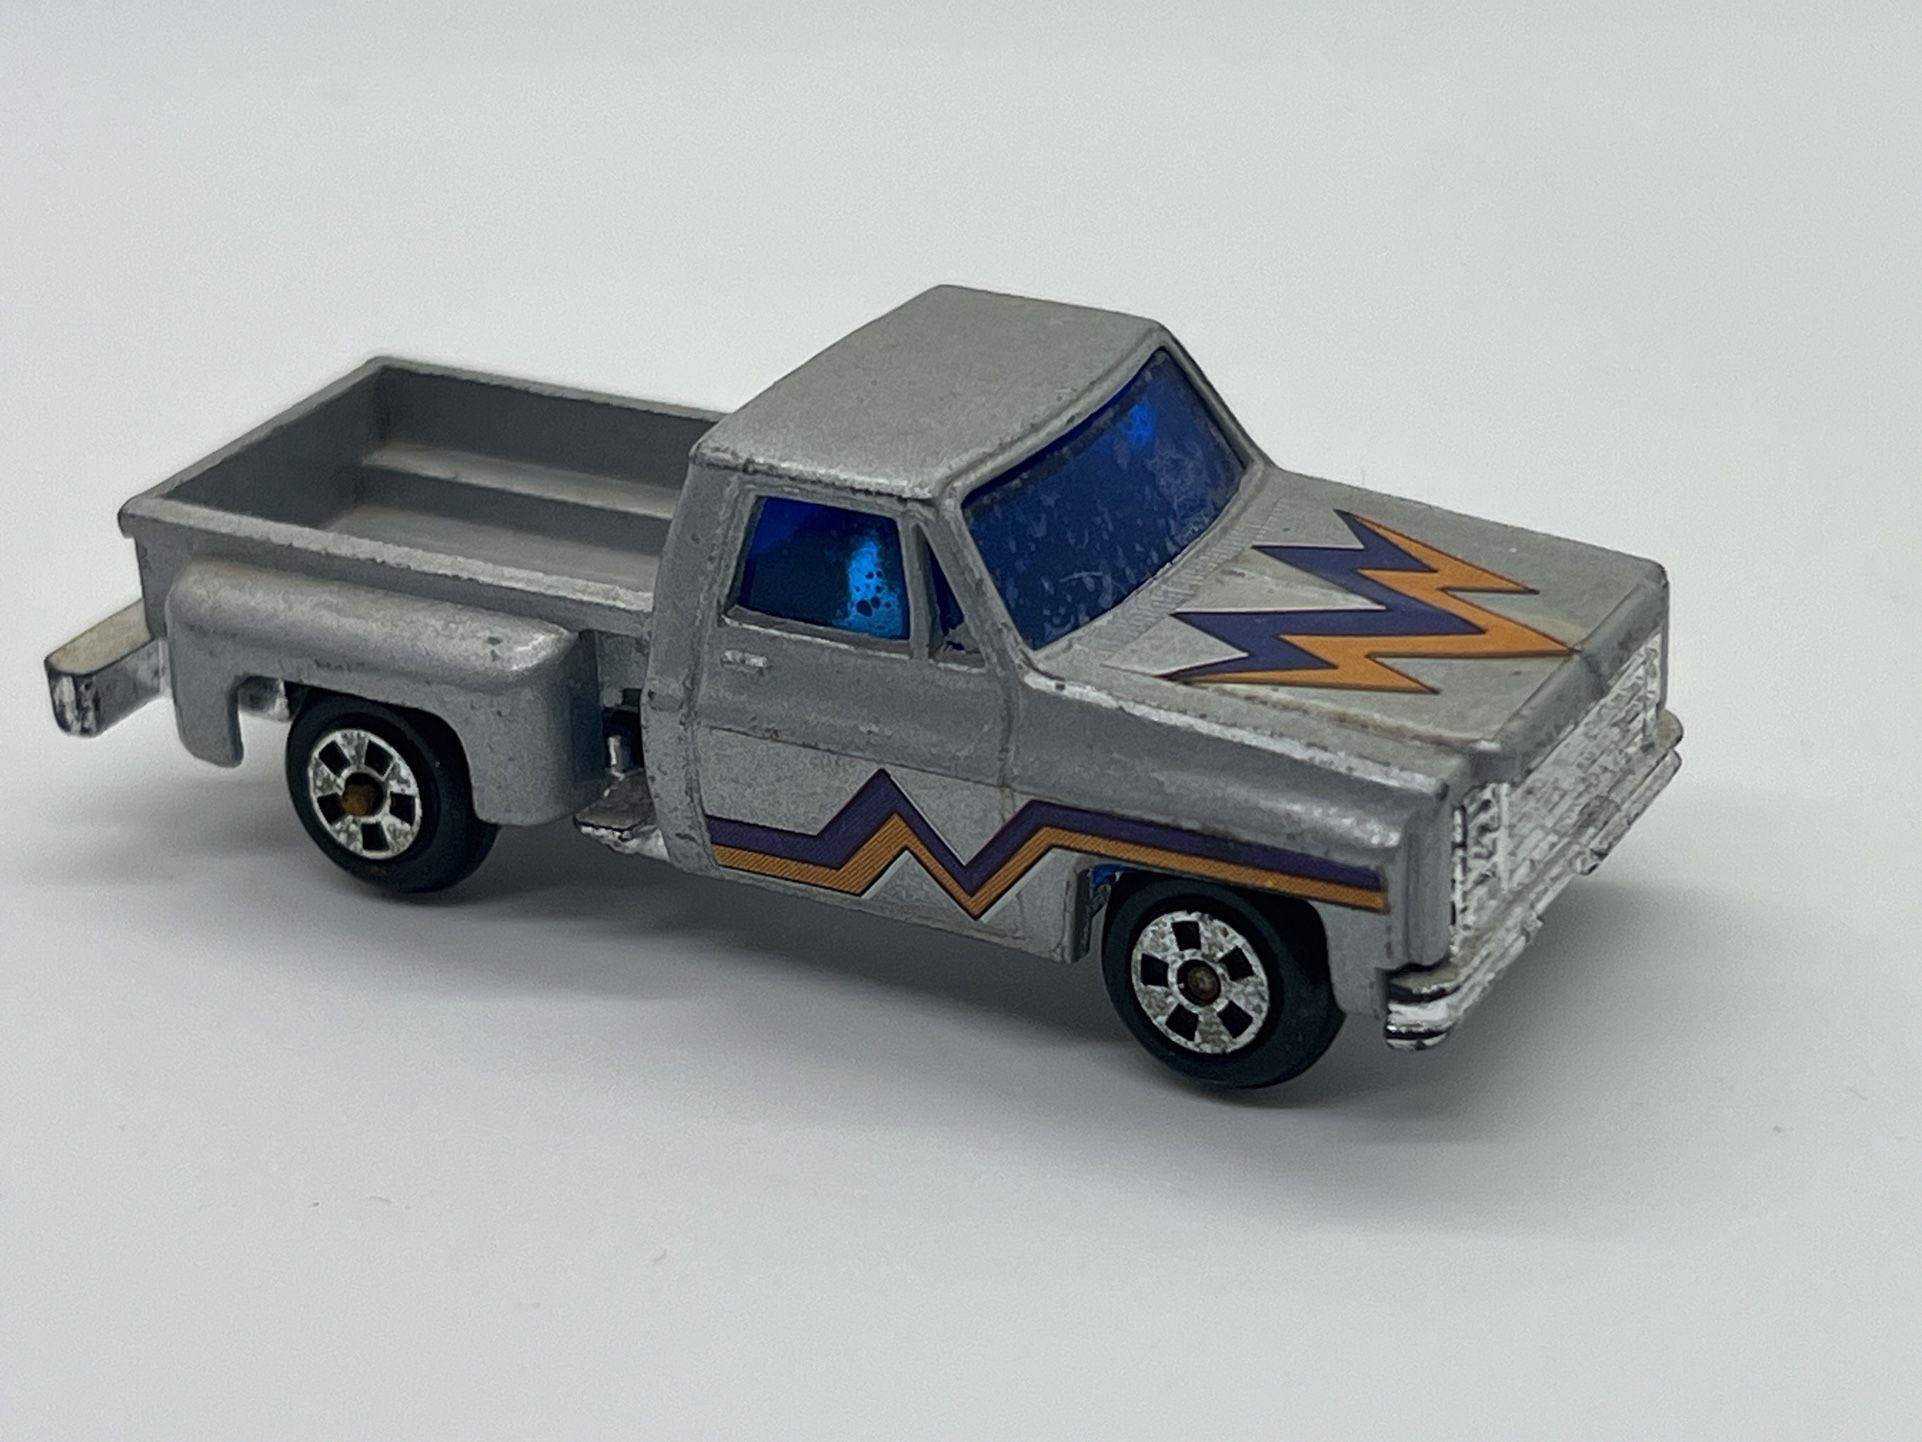 Super Speed Wheels Grey Chevy Stepside Pickup Truck Authentic Scale Models 1:64